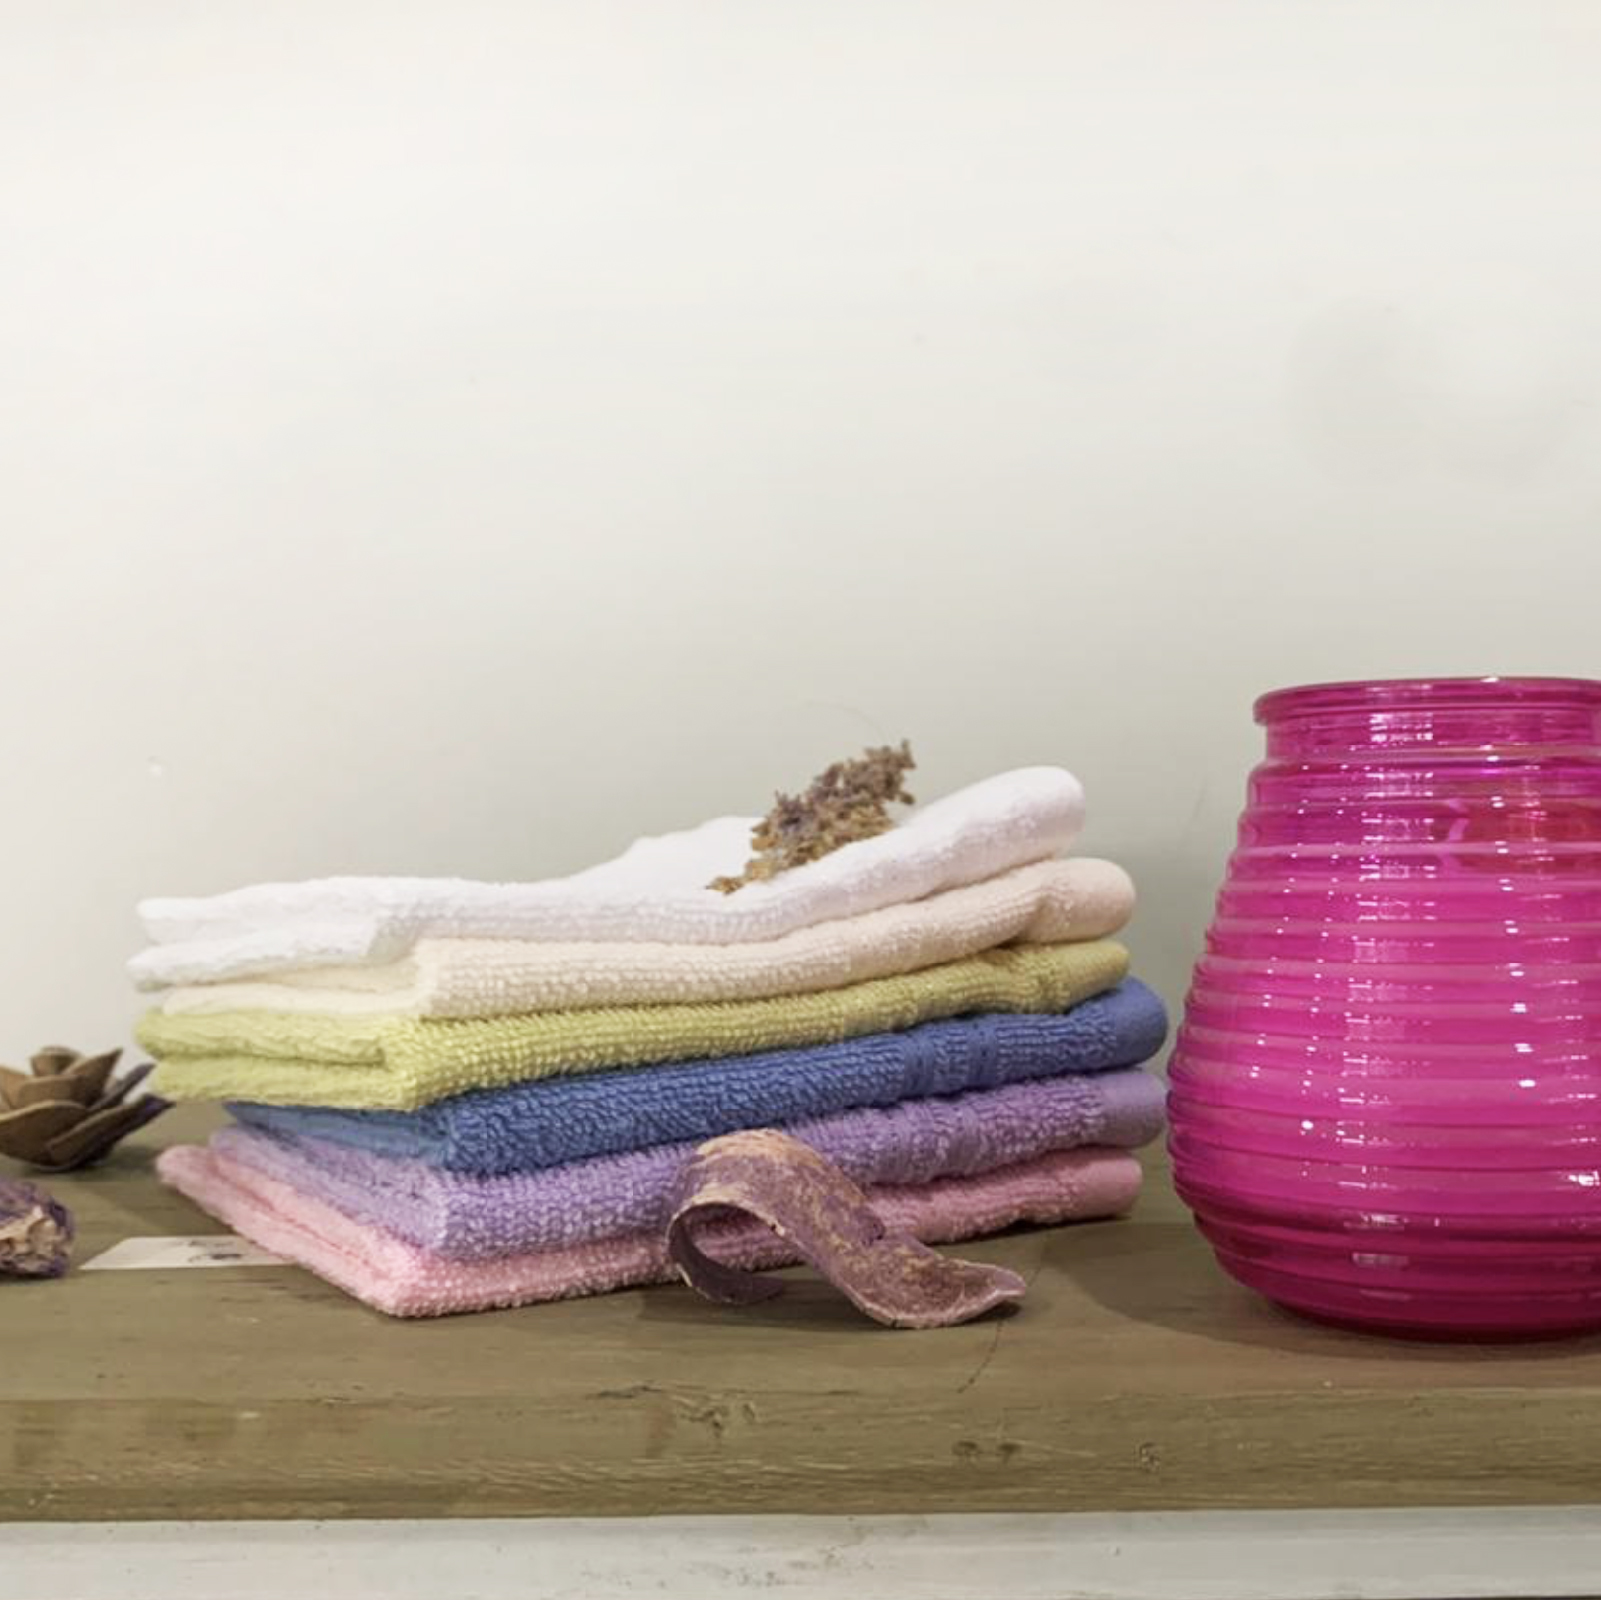 Coventry Bath Towel, 1 Piece 30x30cm 100% Cotton Available in Colors